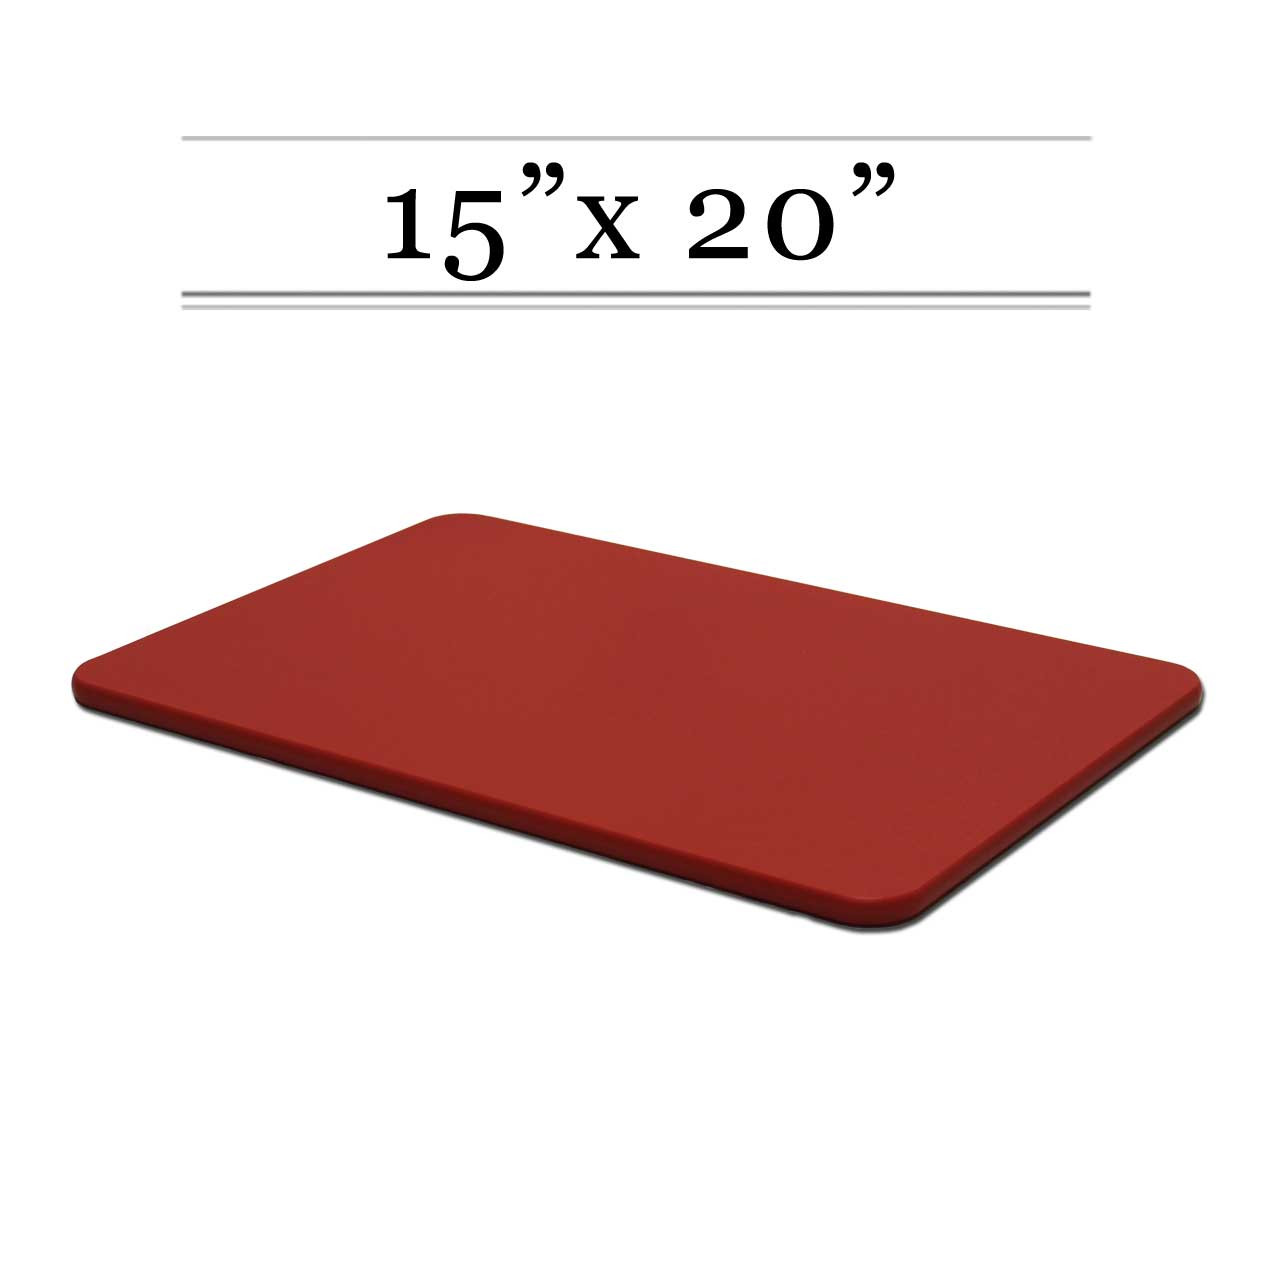 15 x 20 Economy Red Poly Cutting Board - Cutting Board Company - Commercial  Quality Plastic and Richlite Custom Sized Cutting Boards